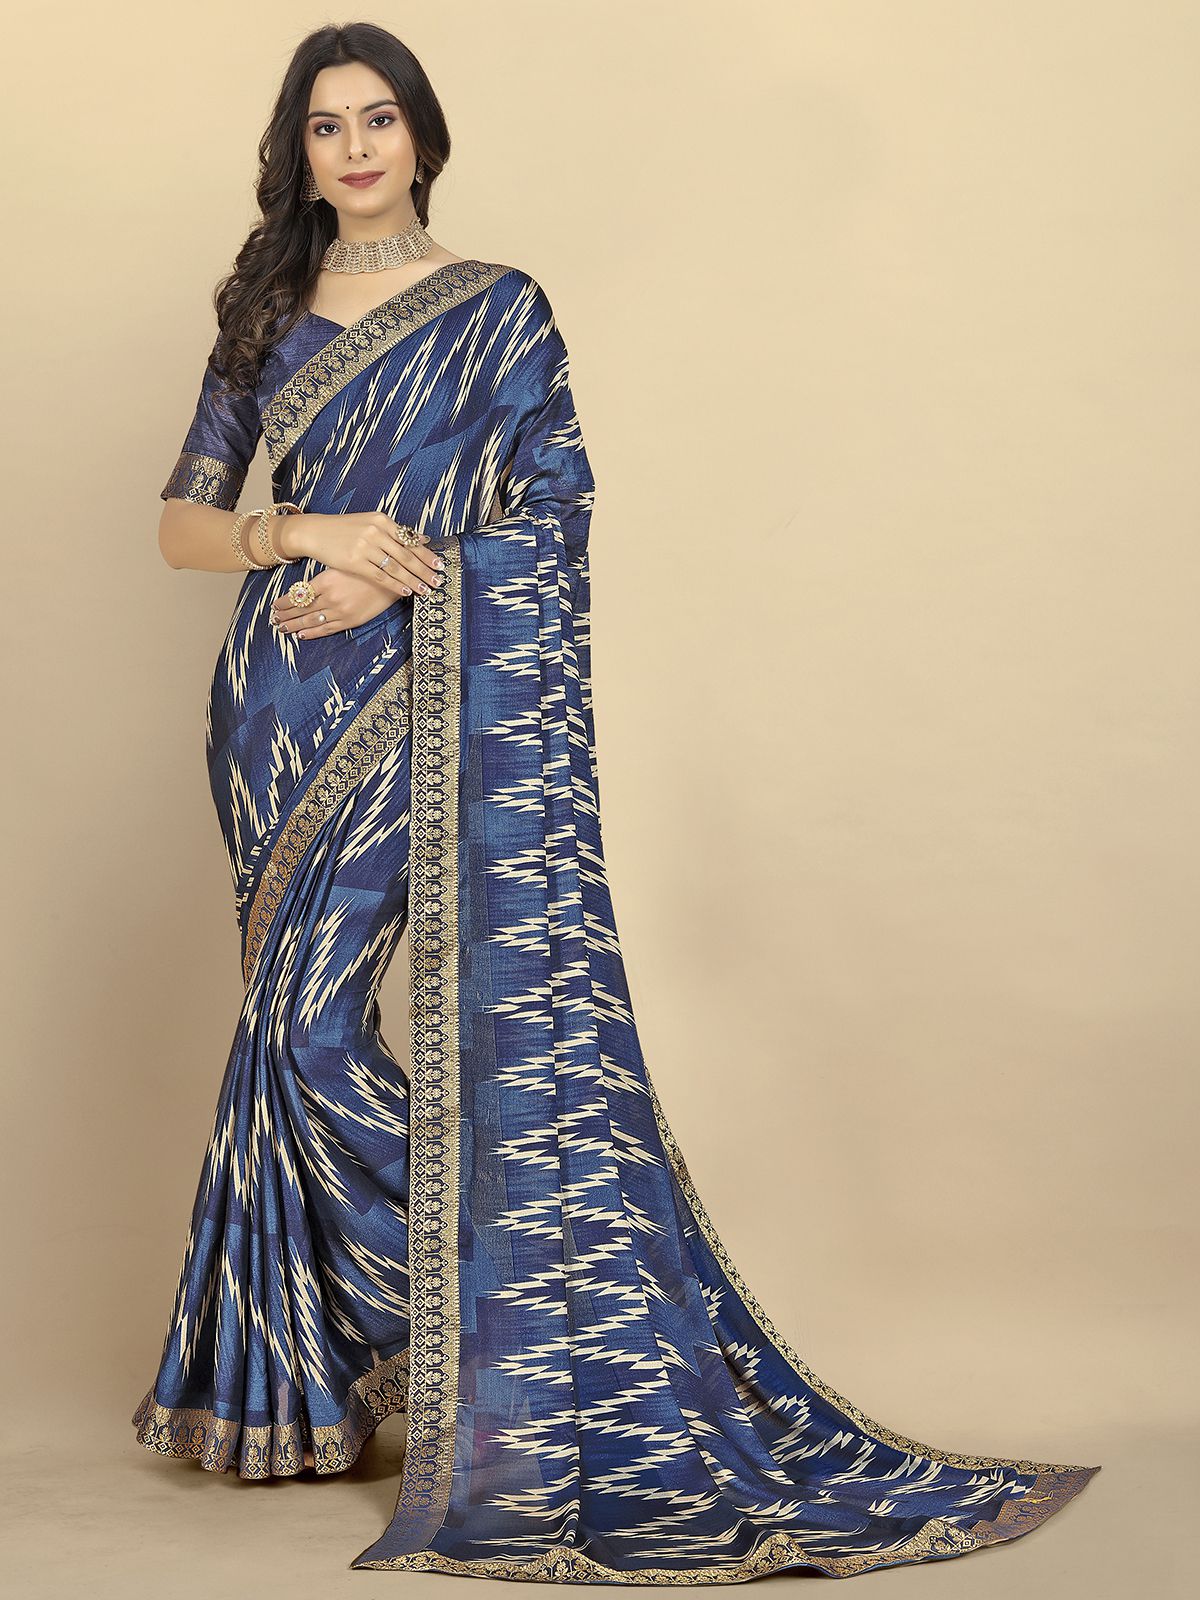 Rangita Women Abstract Printed Moss Georgette Saree With Blouse Piece - Blue